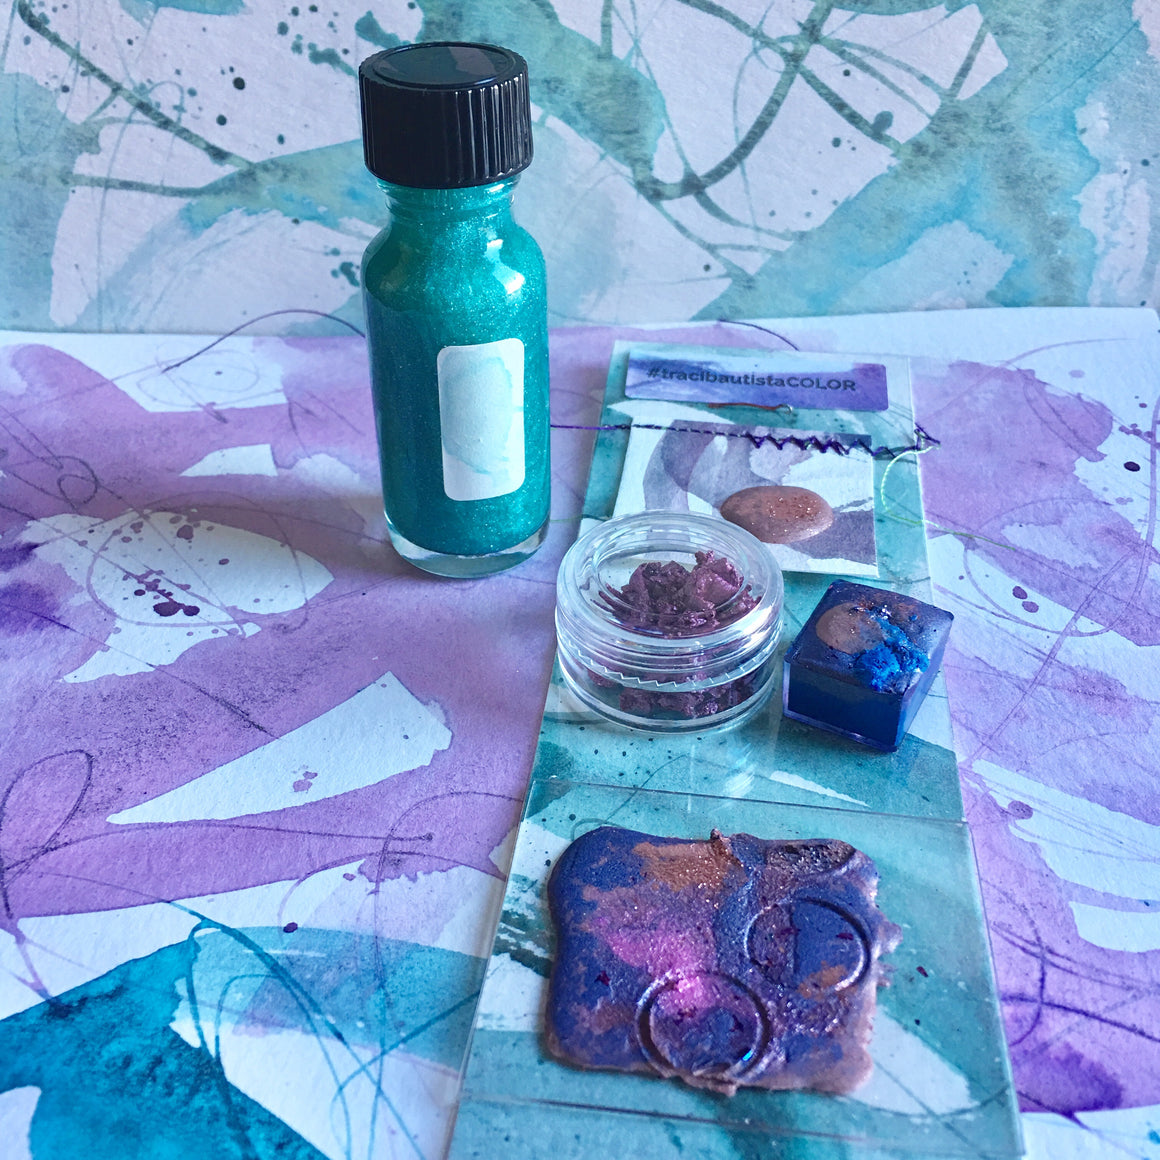 #tracibautistaCOLOR ~ WHISPERS OF WINTER artisanal watercolor collection